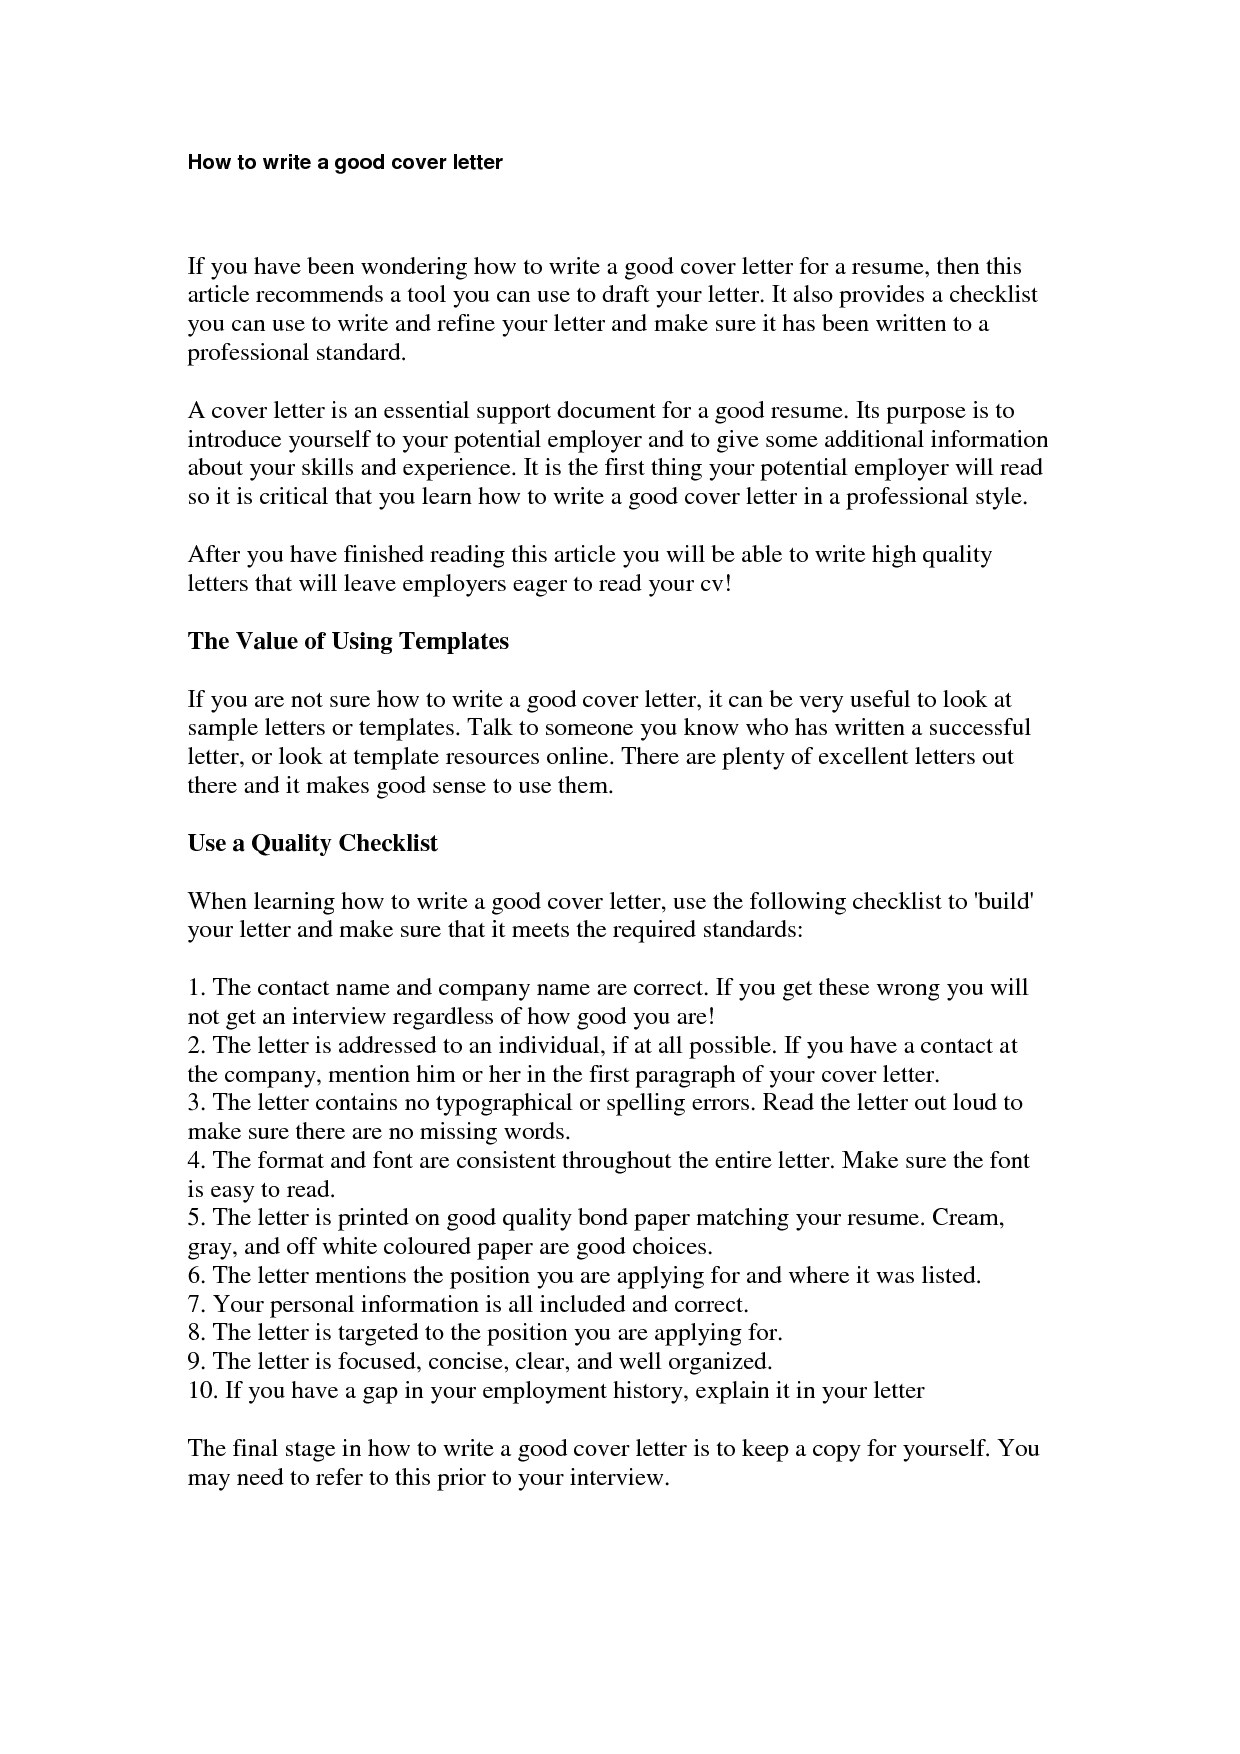 How to Write A Proper Resume and Cover Letter How to Write A Good Cover Letter Gplusnick